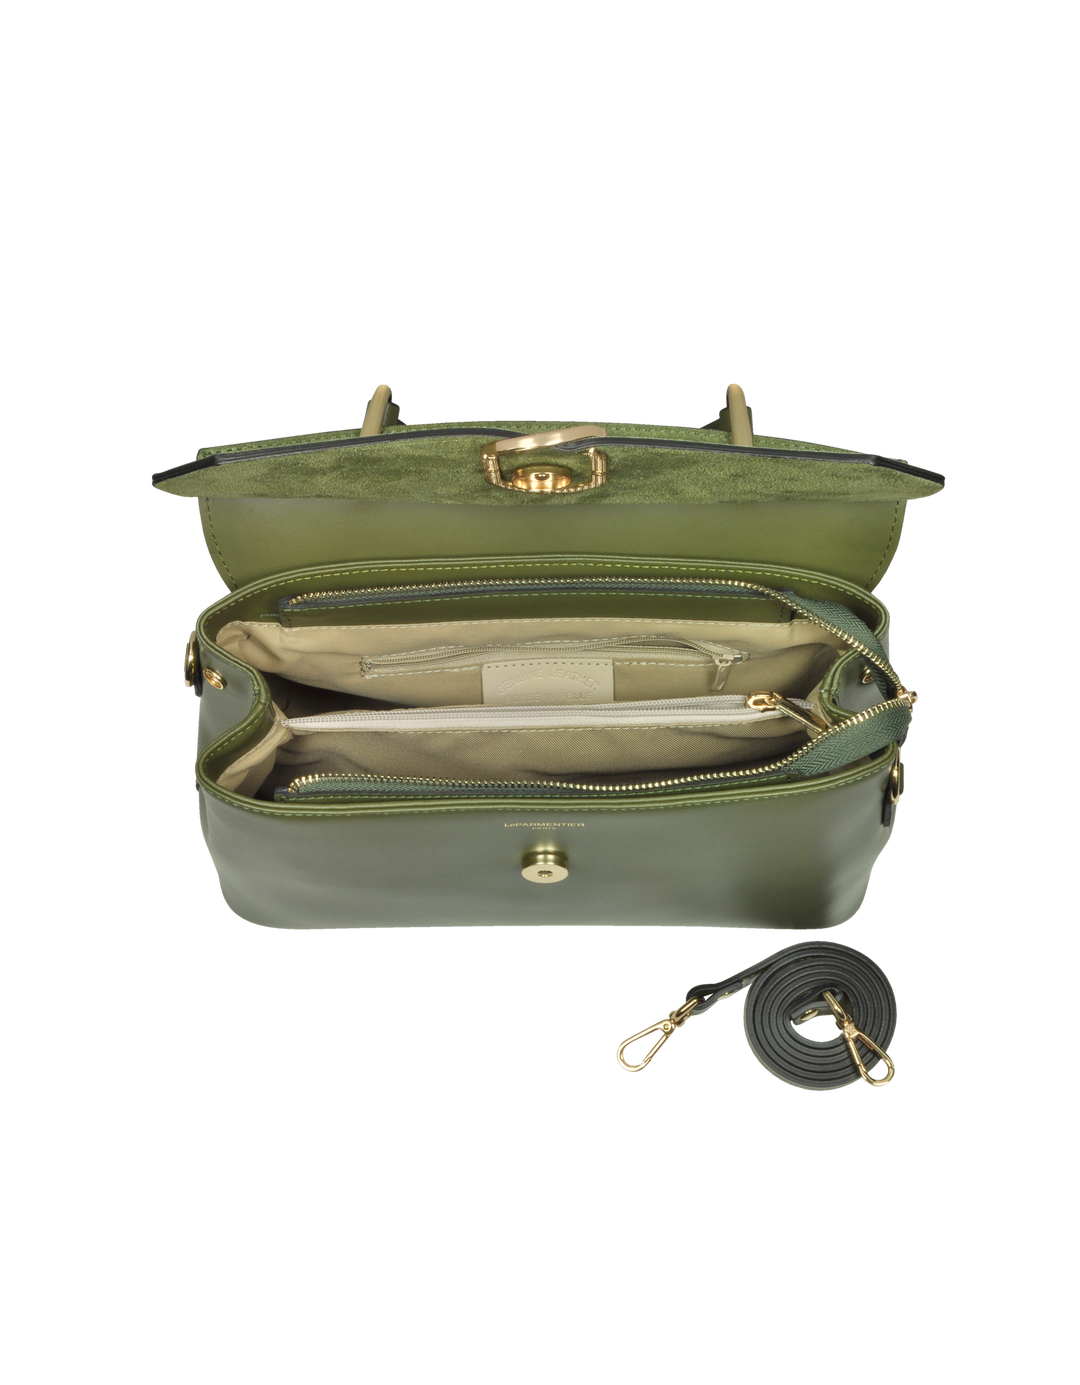 Open green leather handbag with compartments and detachable strap